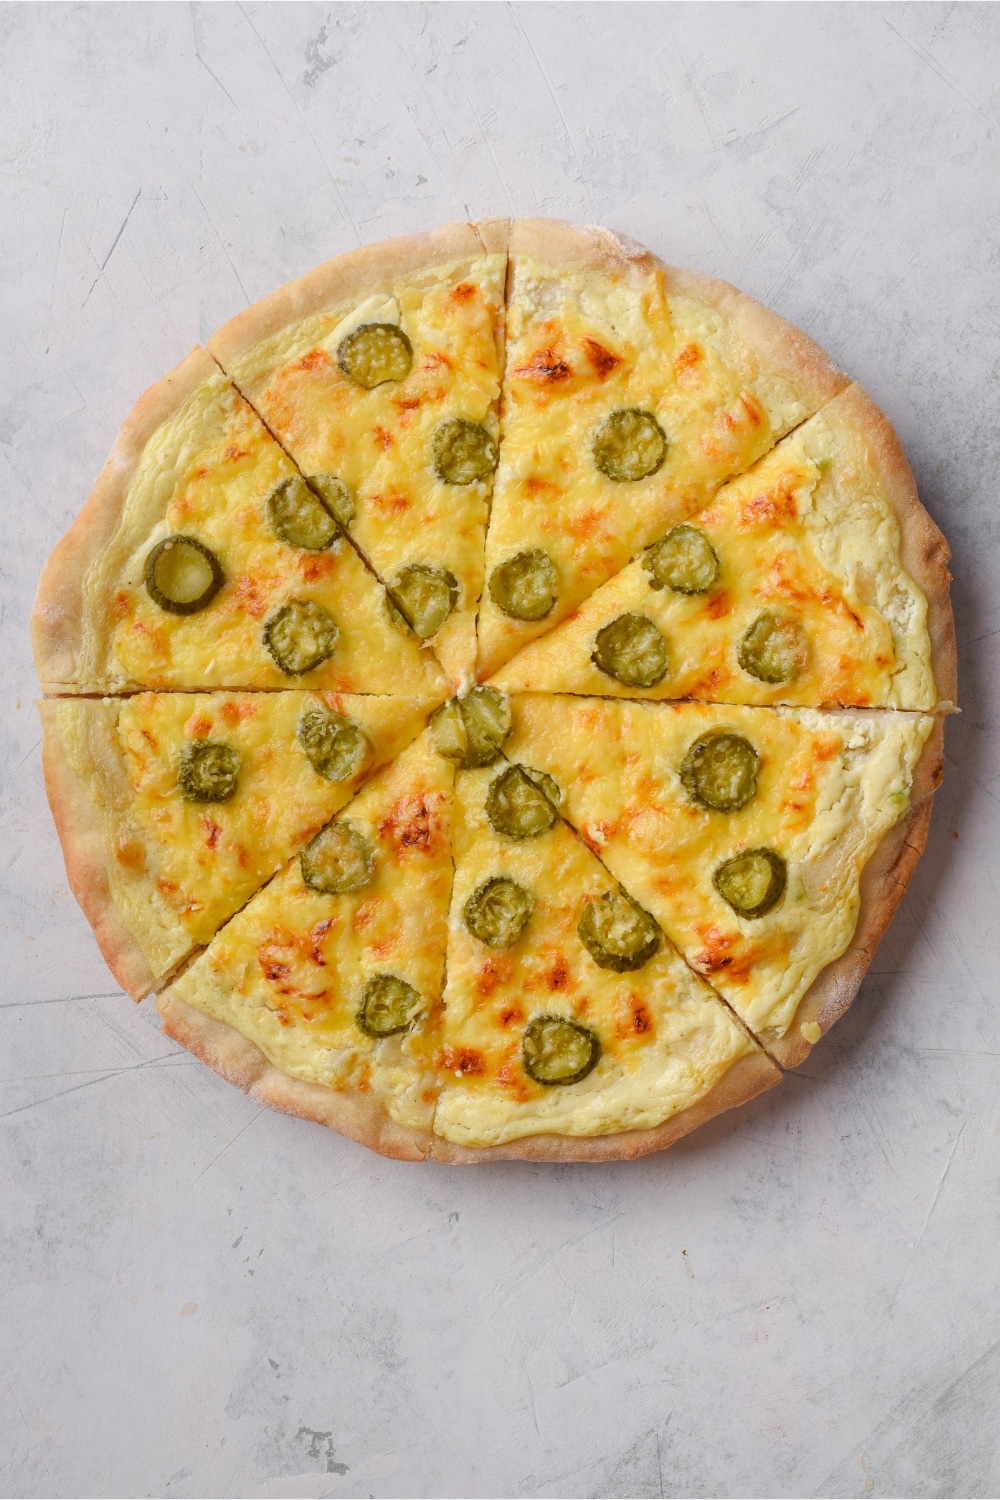 Top view of a whole dill pickle pizza.